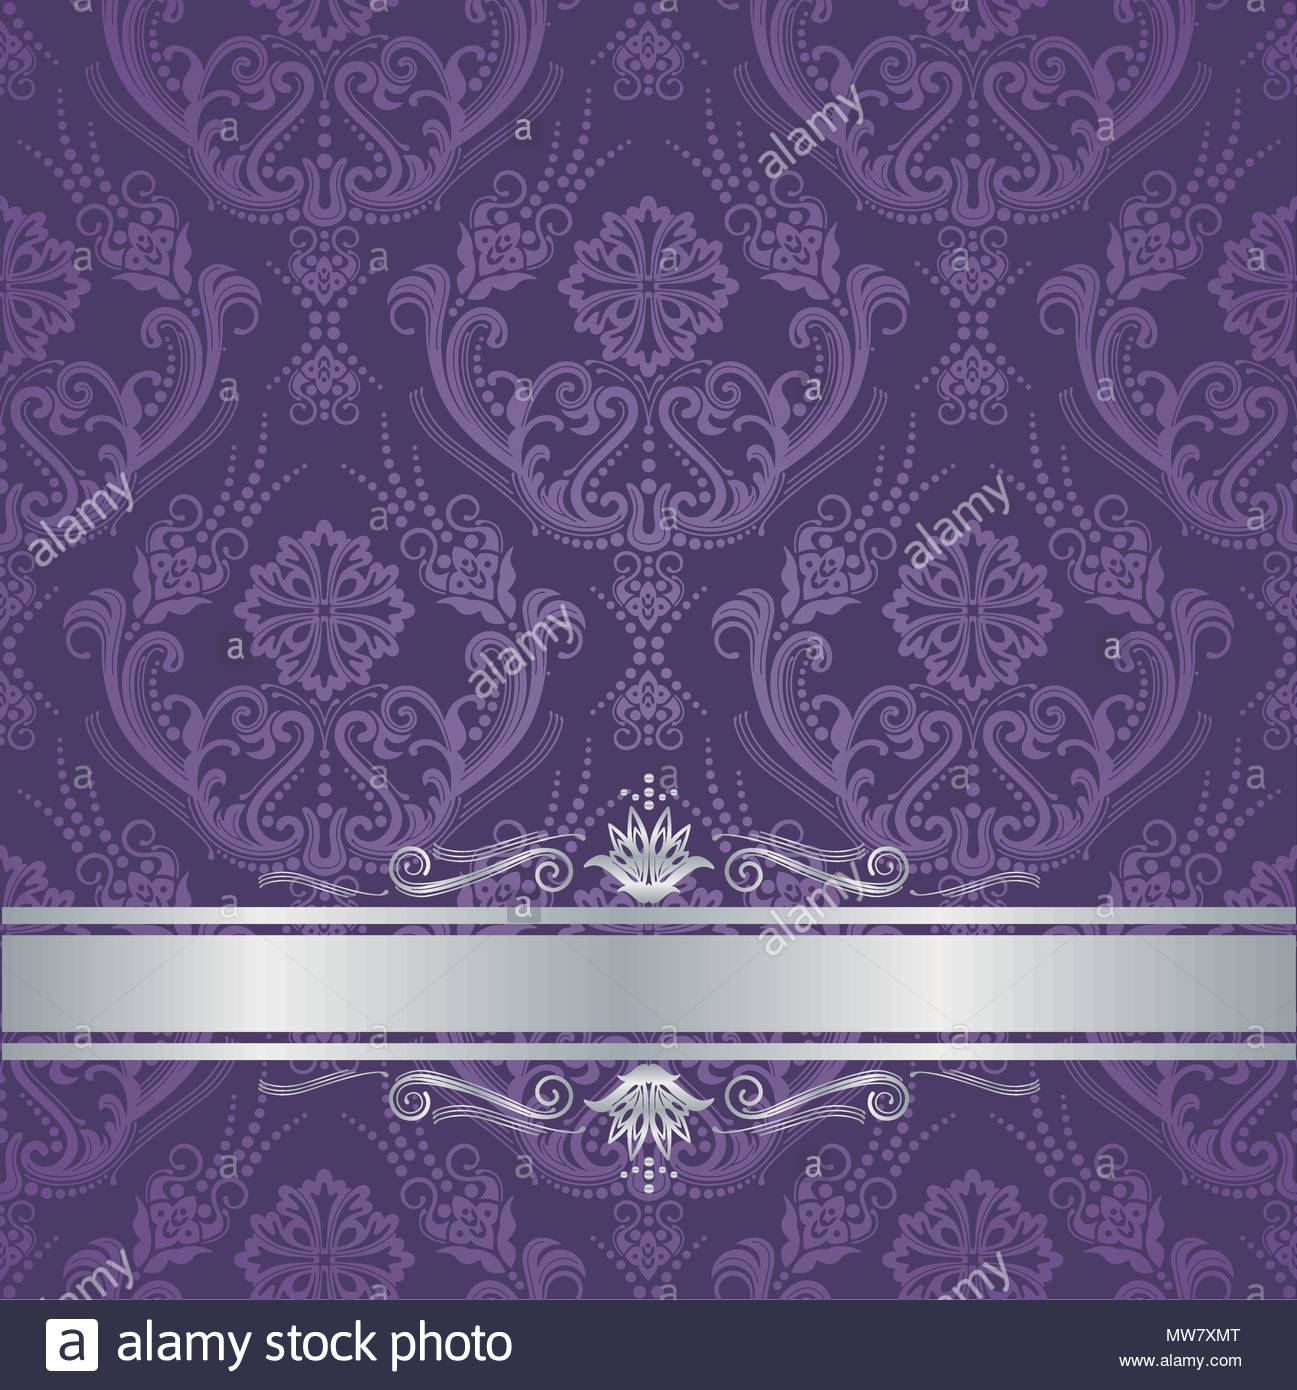 Luxury Purple Victorian Style Floral Damask Wallpaper Cover With